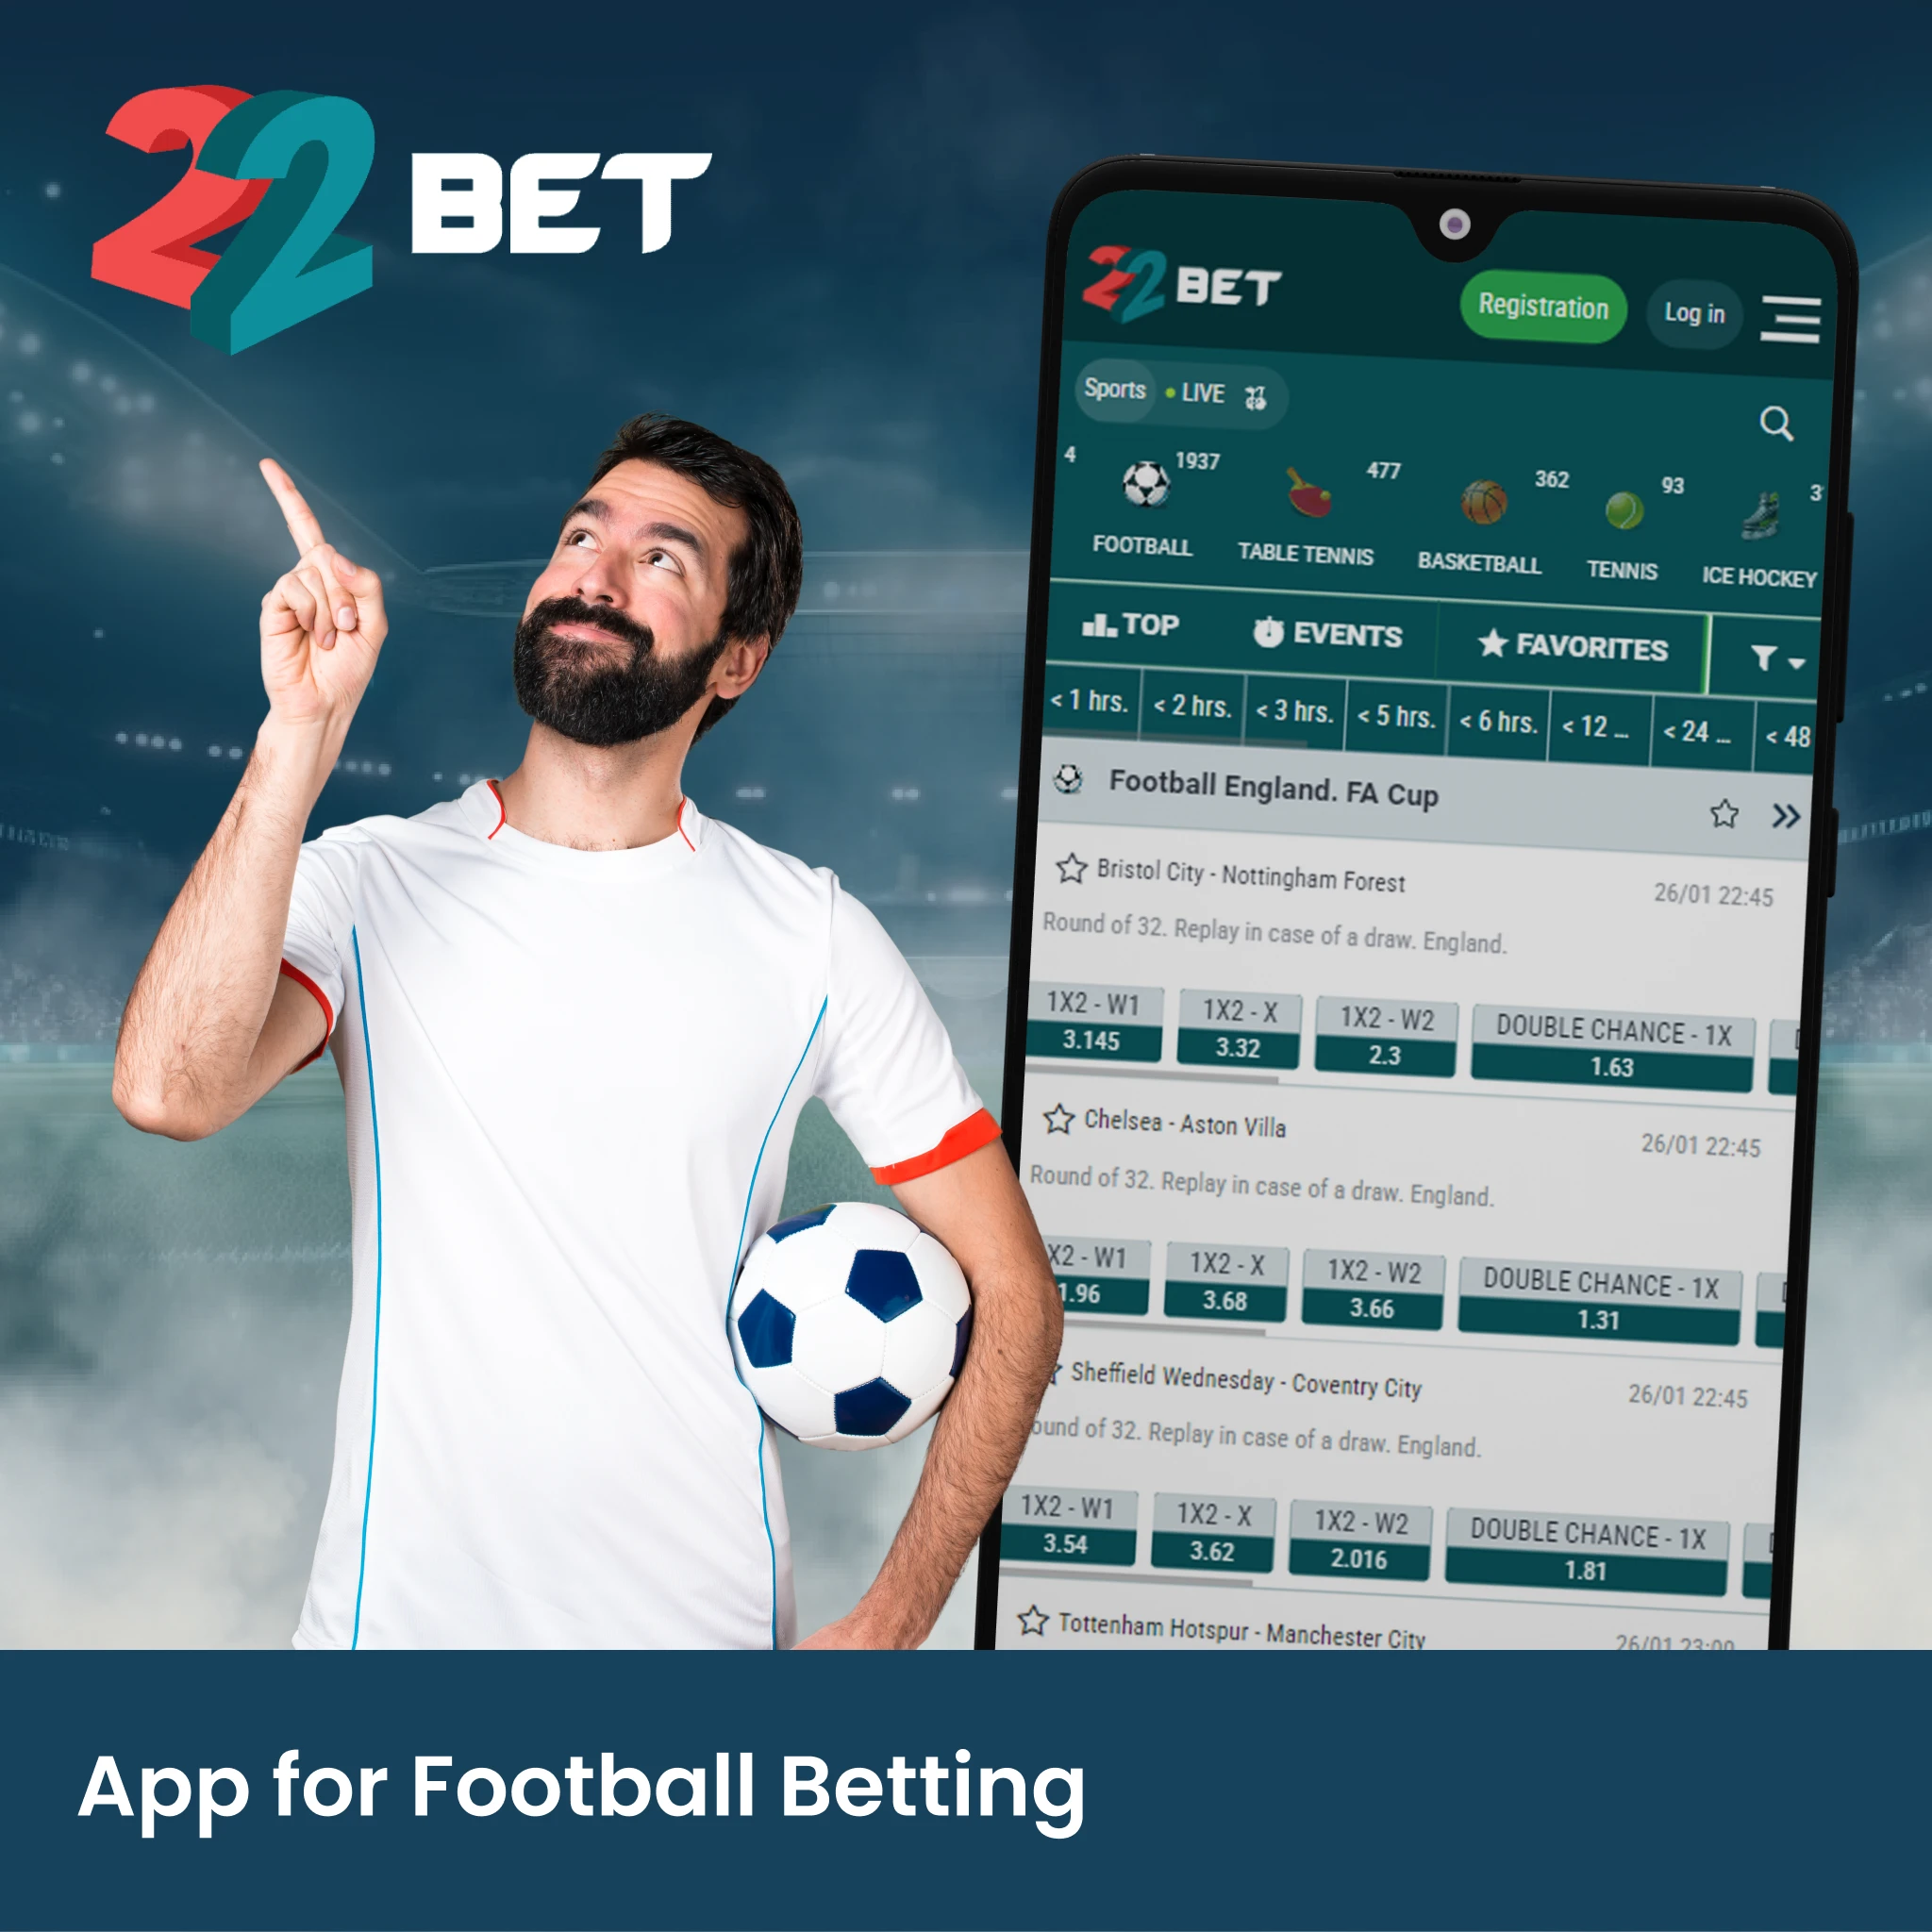 22bet application has a clear functionality for football betting.